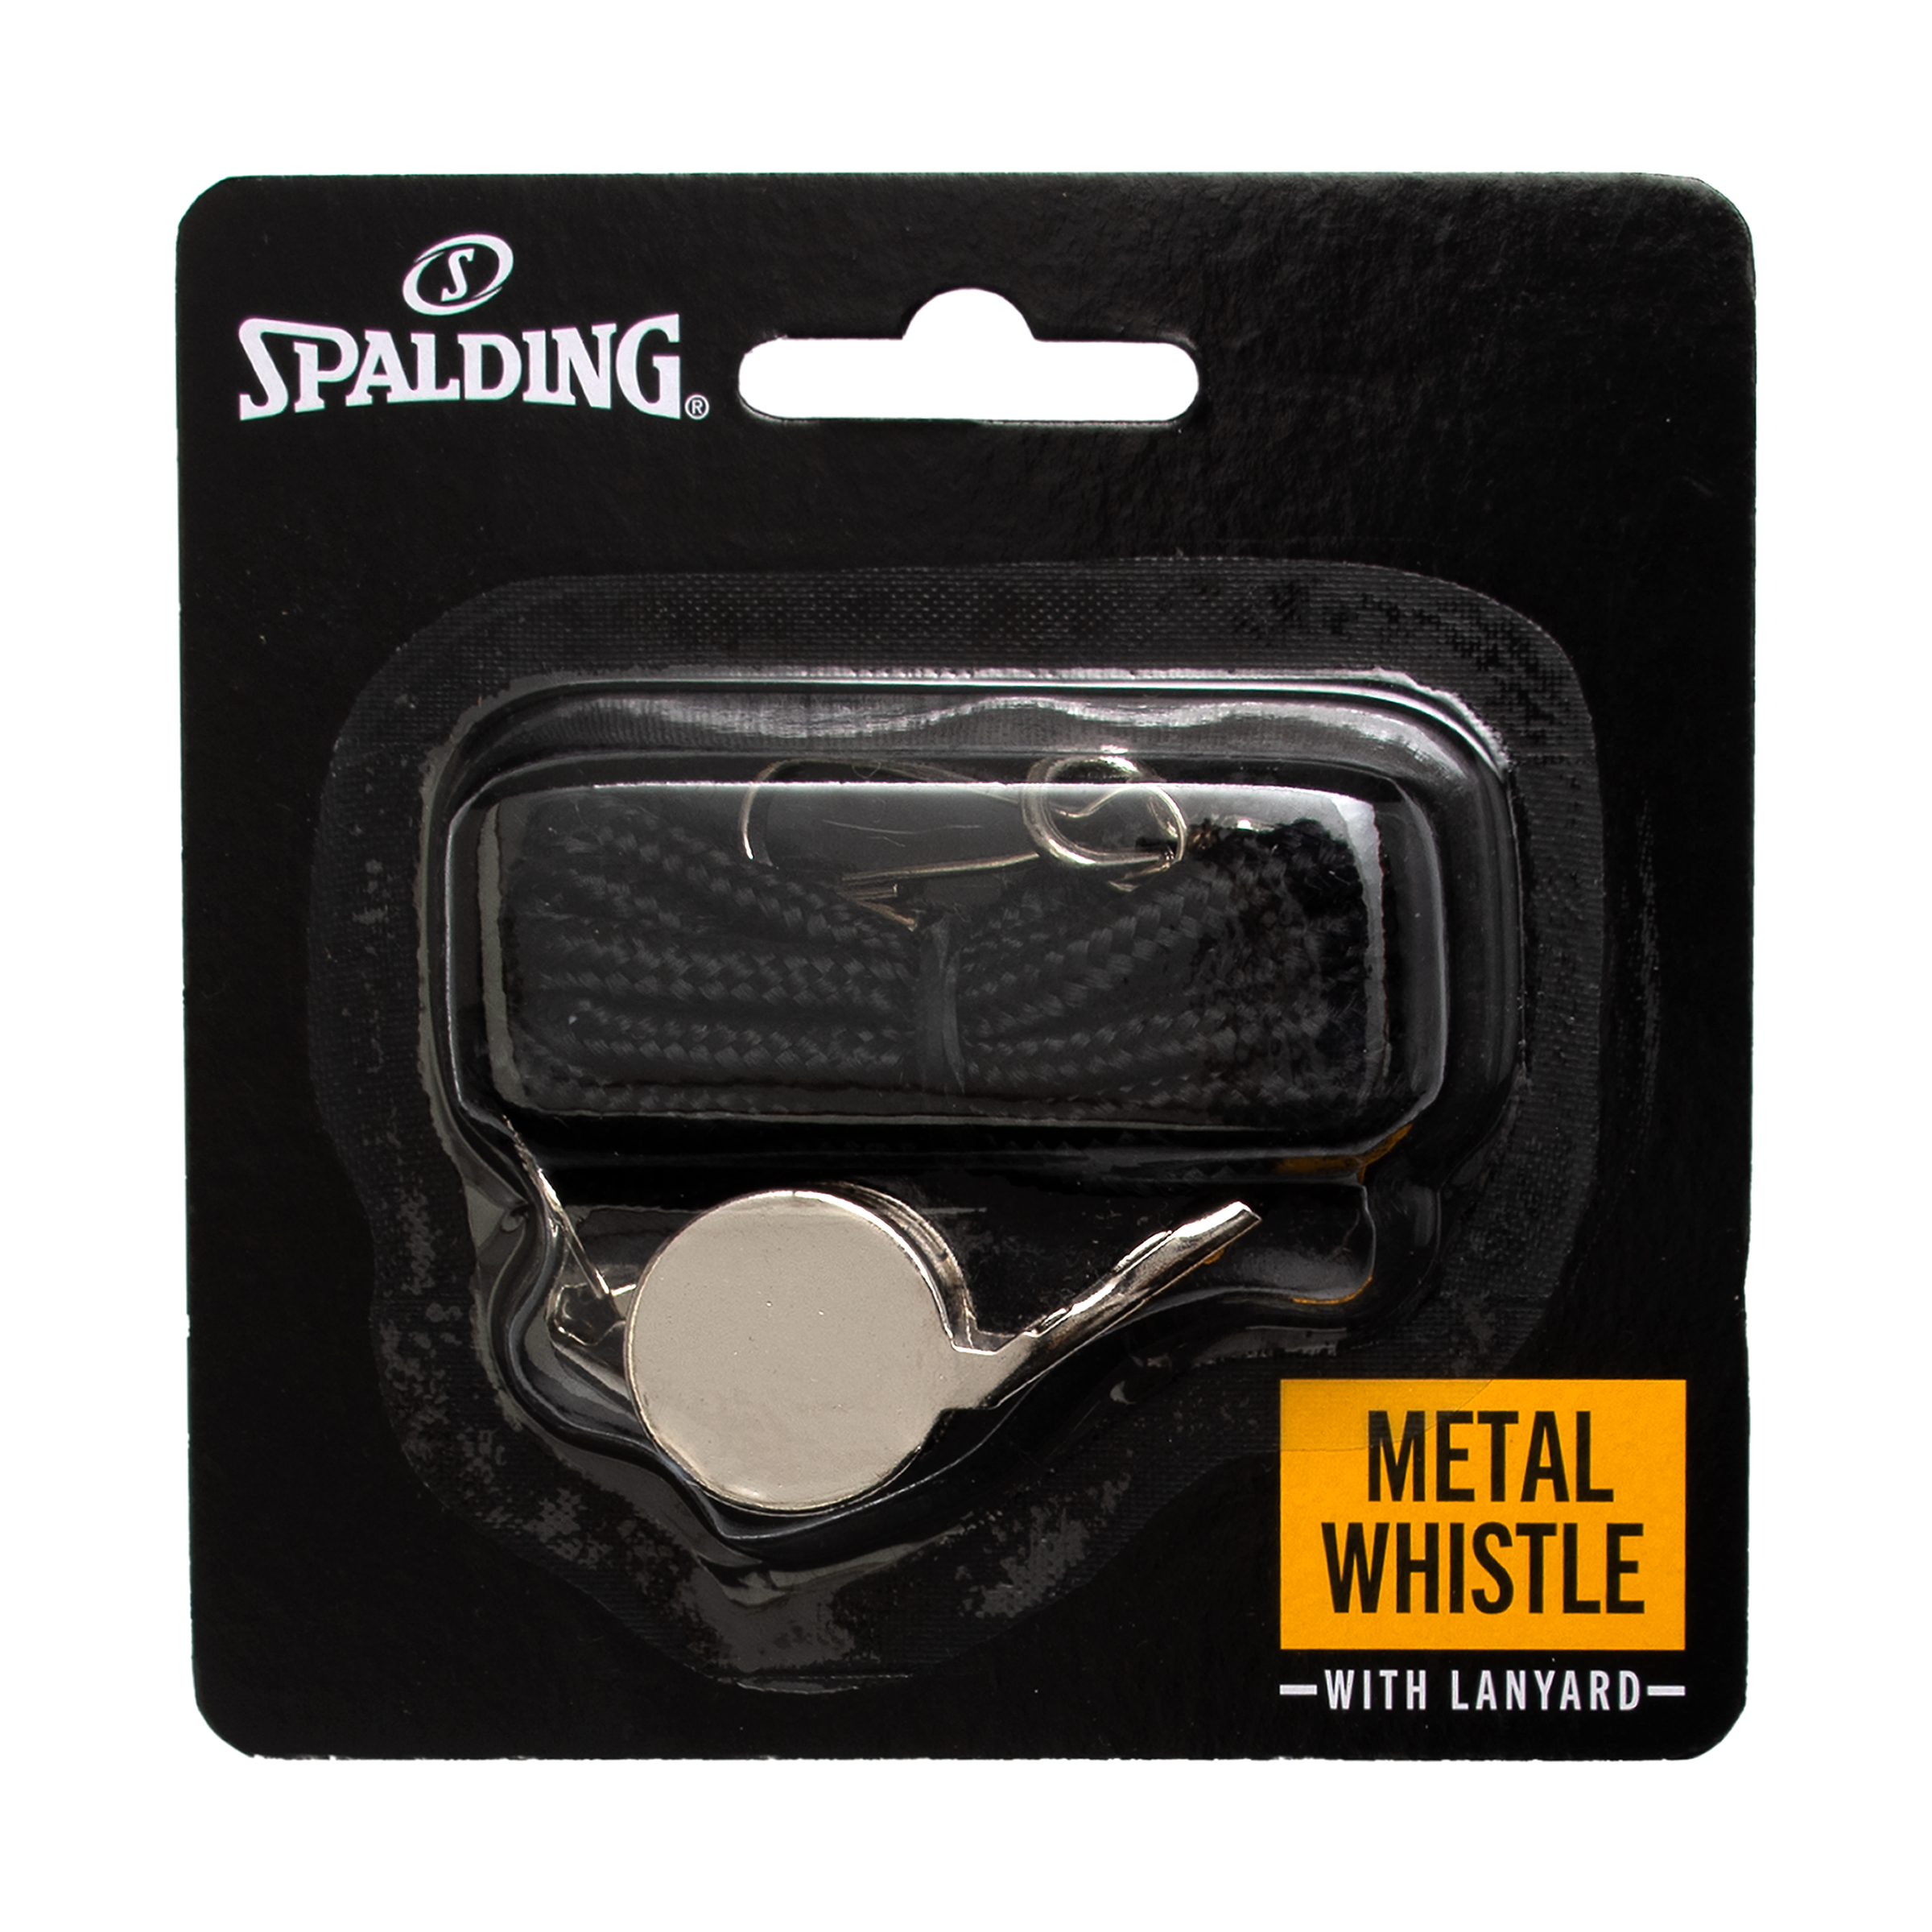 Spalding Metal Whistle - image 4 of 4